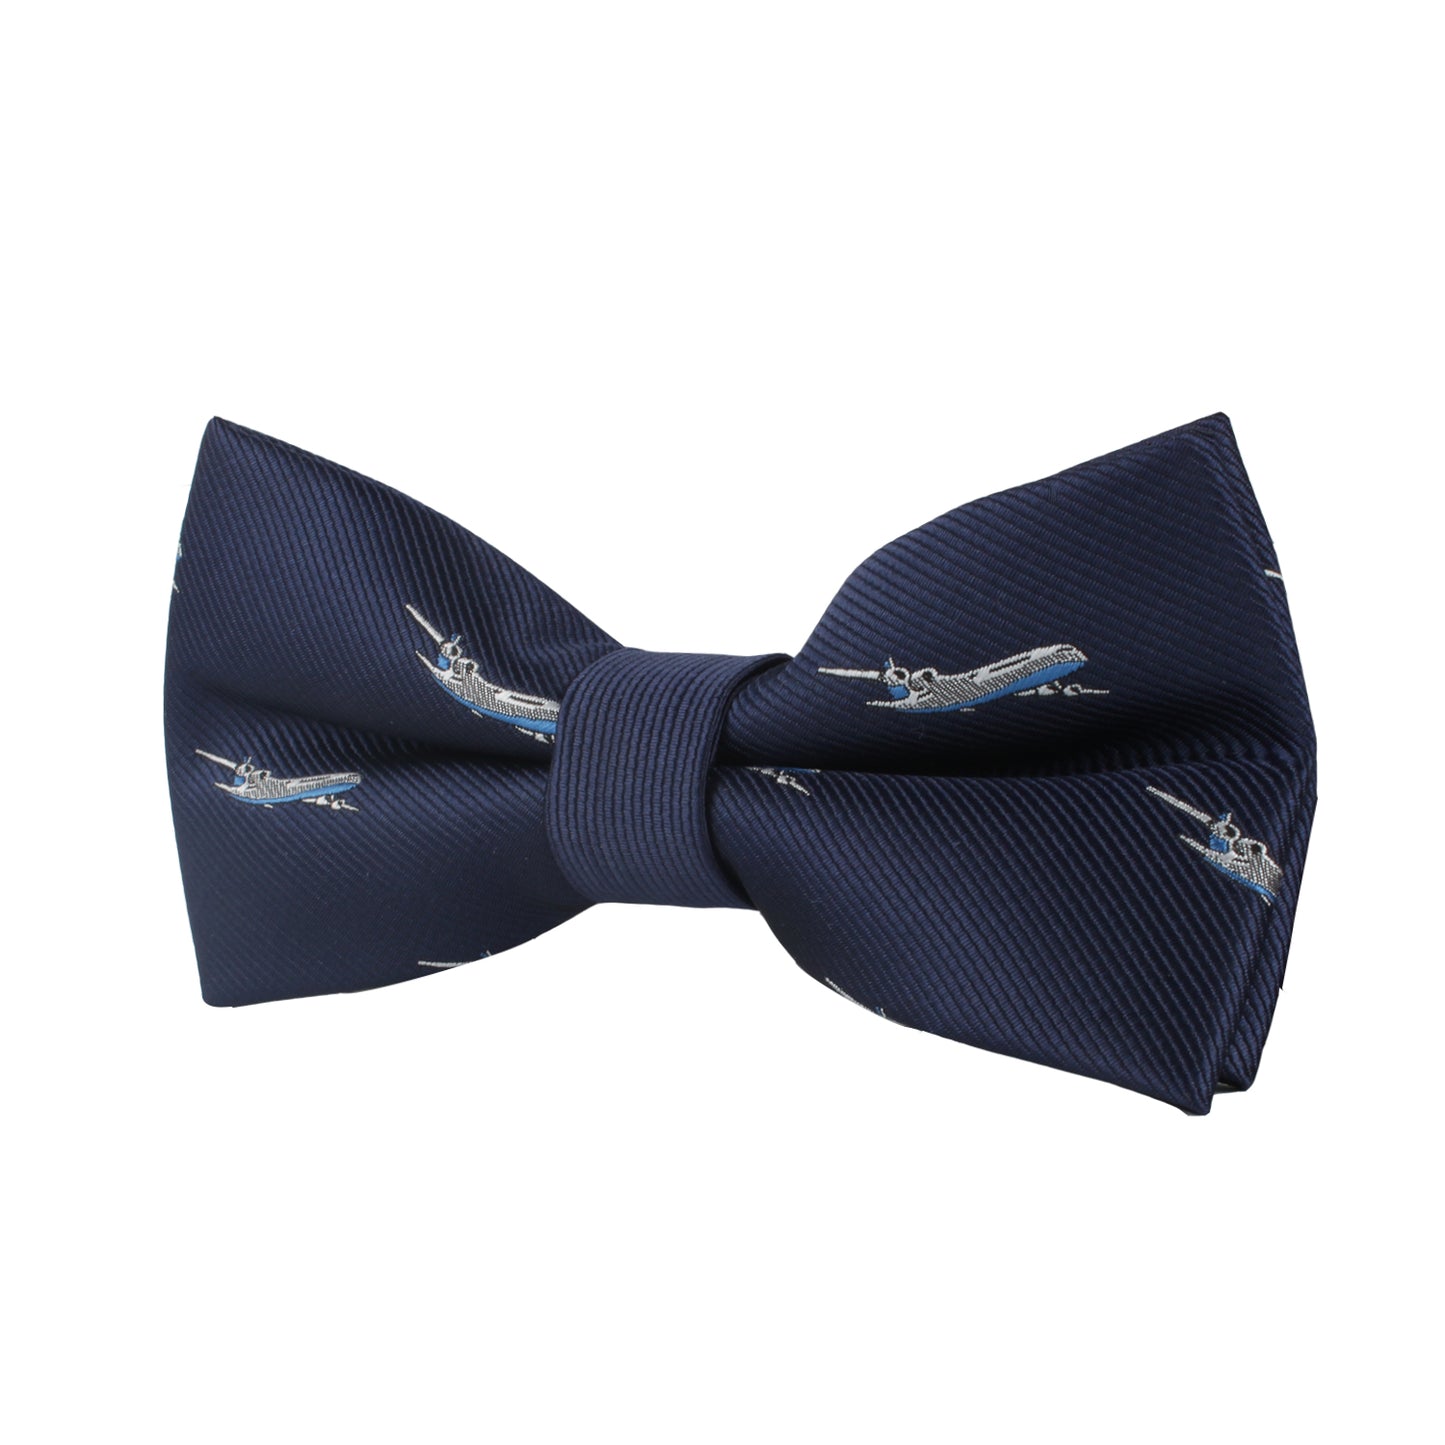 A high-fashion Aeroplane bow tie with airplanes in the skies.